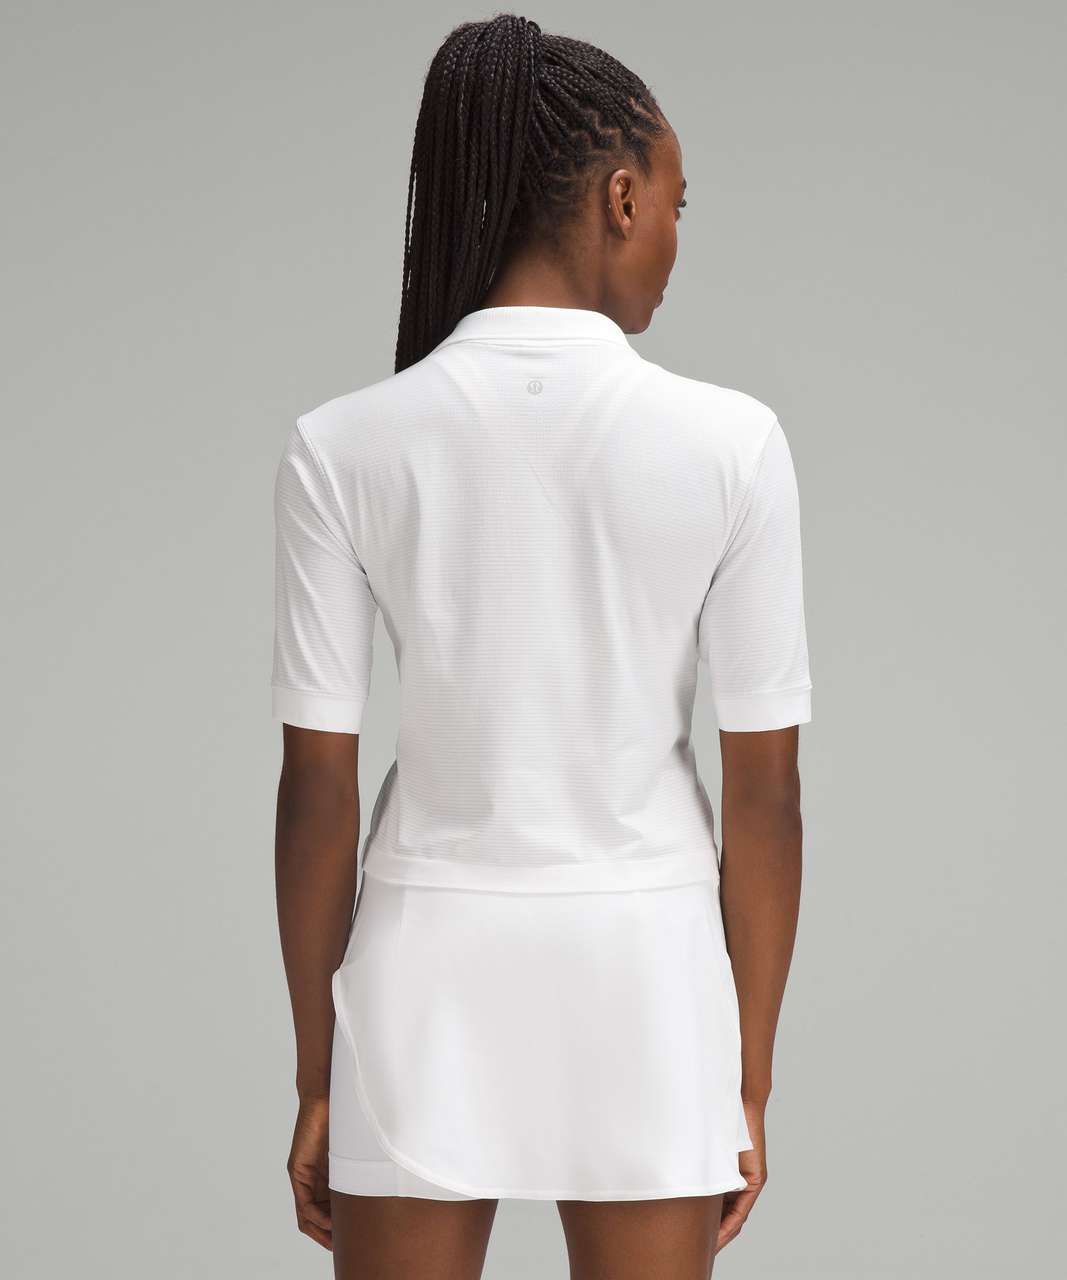 Lululemon Swiftly Tech Relaxed-Fit Polo Shirt - White / White